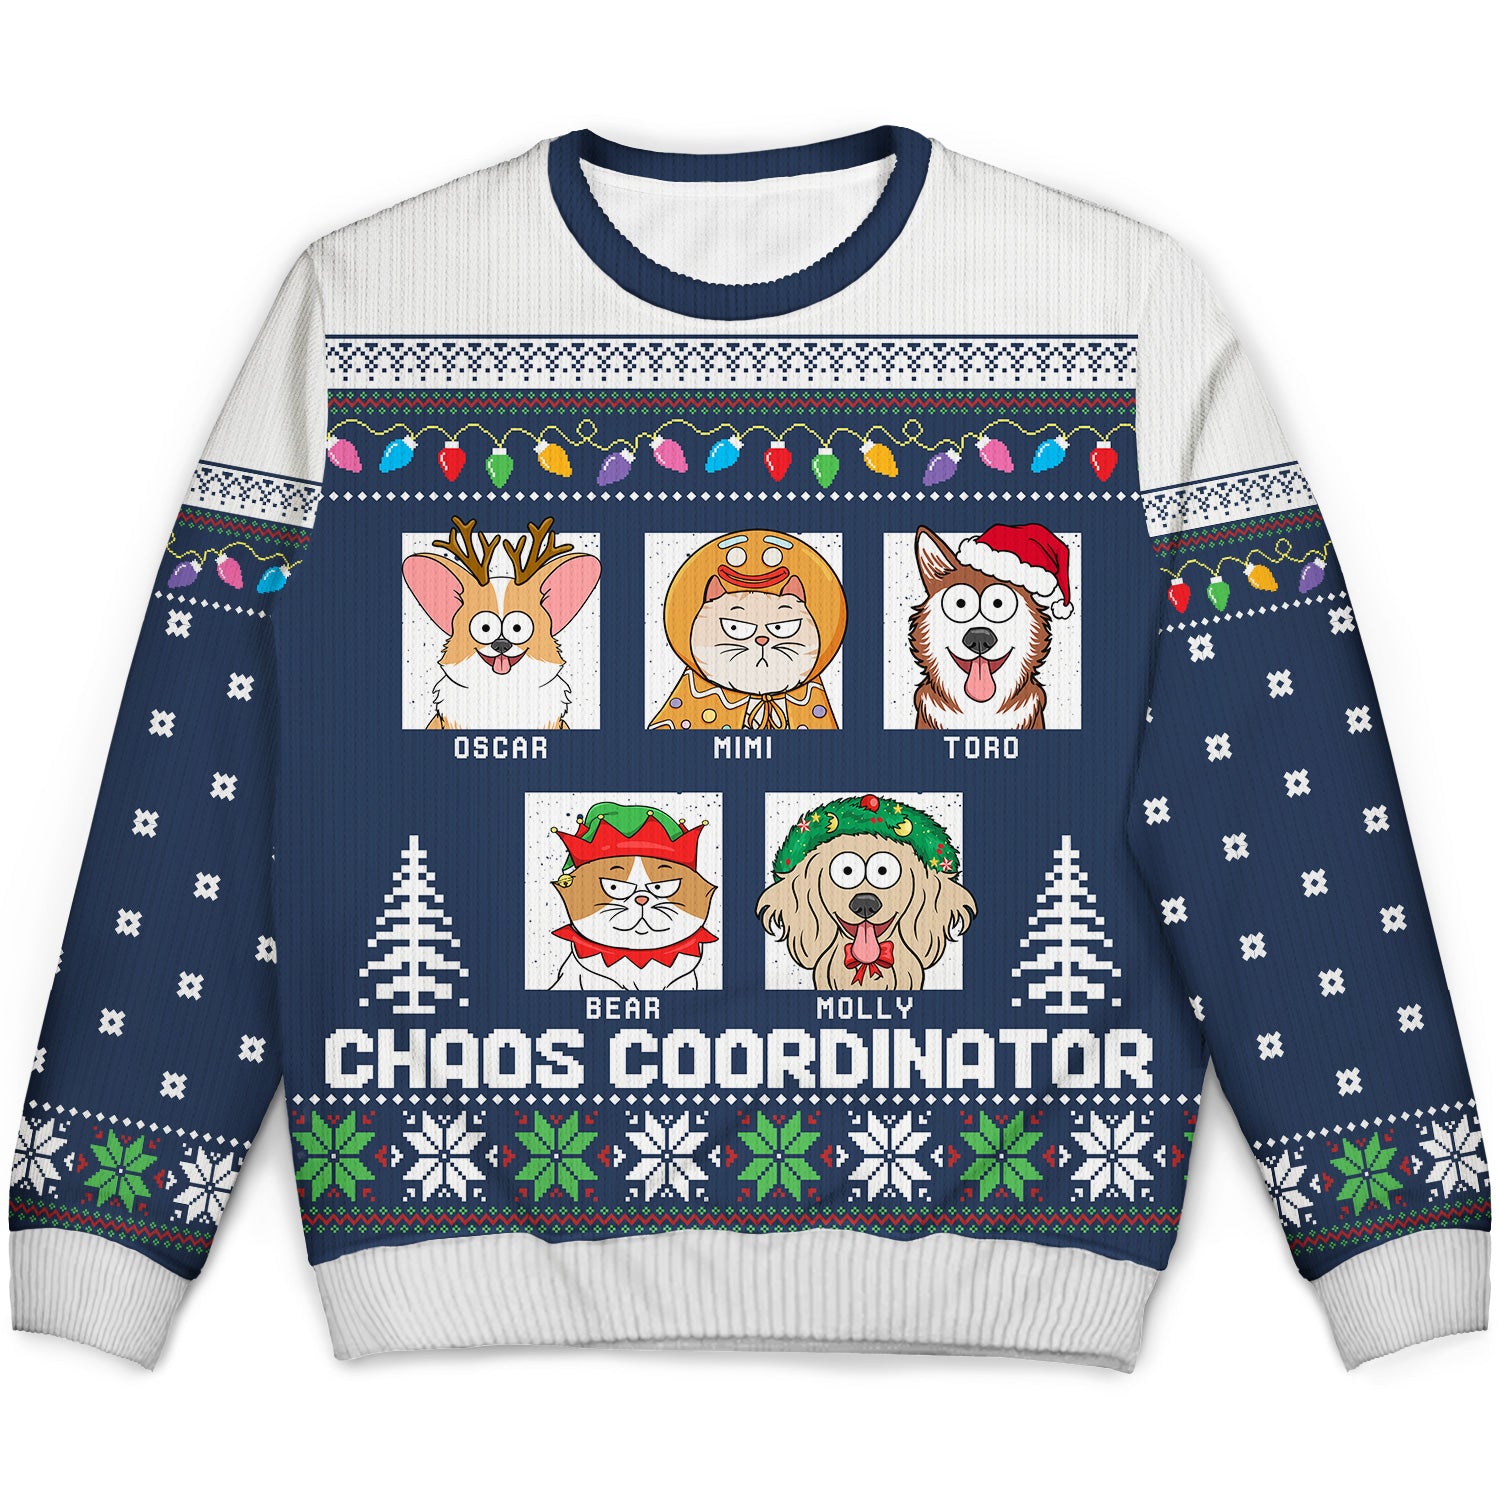 Chaos Coordinator - Funny, Christmas Gift For Dog Lover, Cat Lover, Pet Owner - Personalized Unisex Ugly Sweater